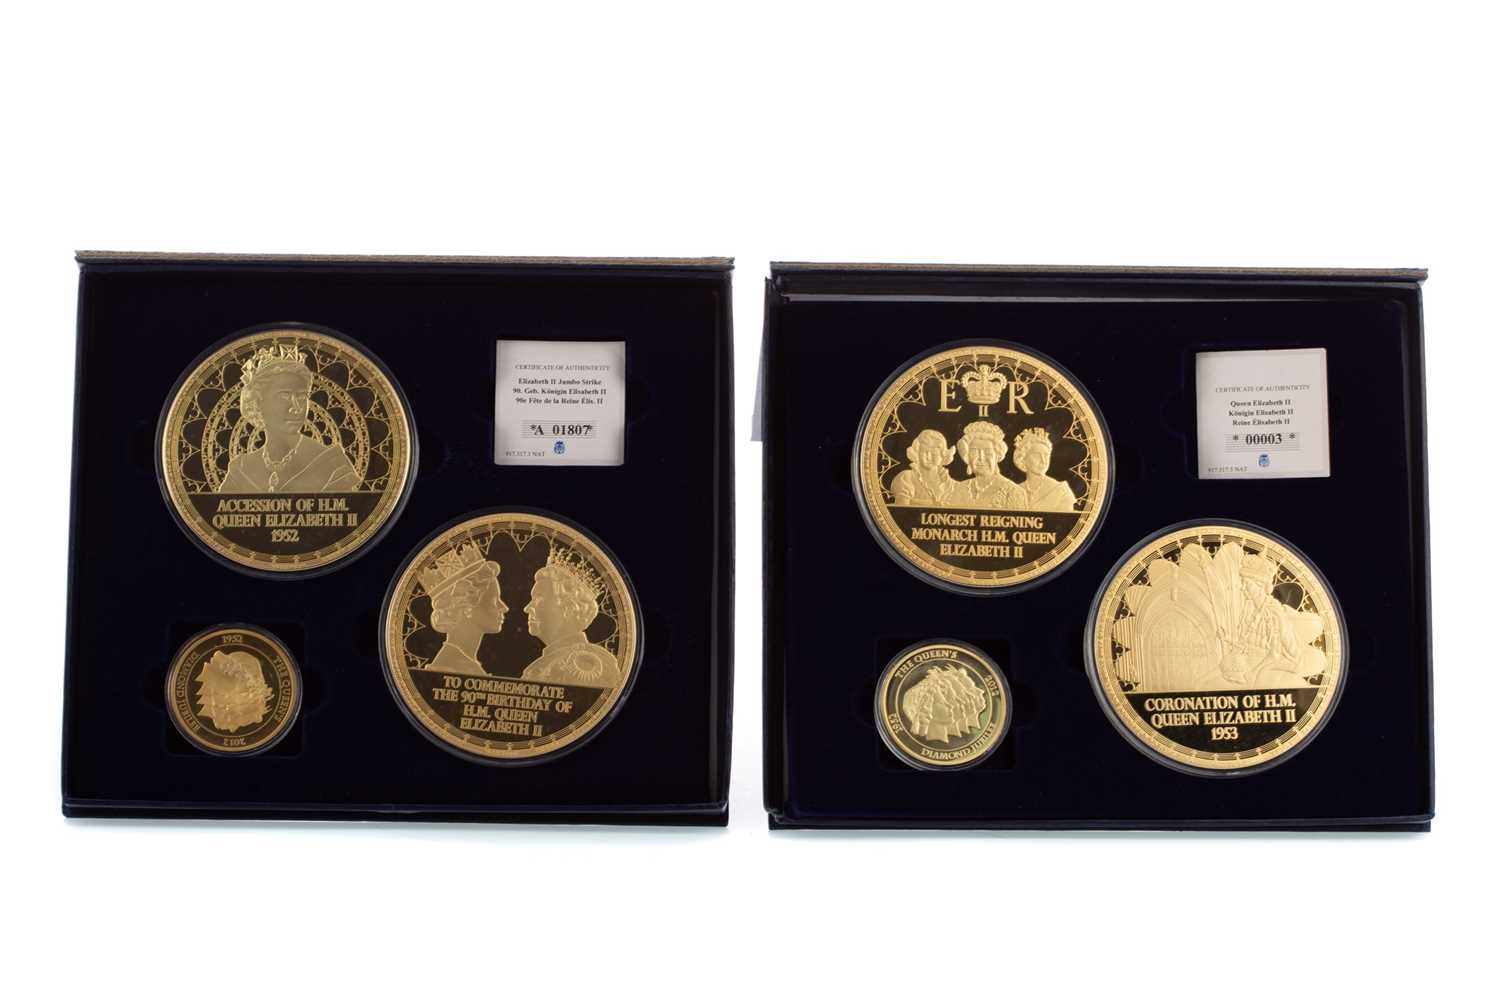 Lot 45 - TWO SETS OF COMMEMORATIVE QUEEN ELIZABETH II COIN SETS